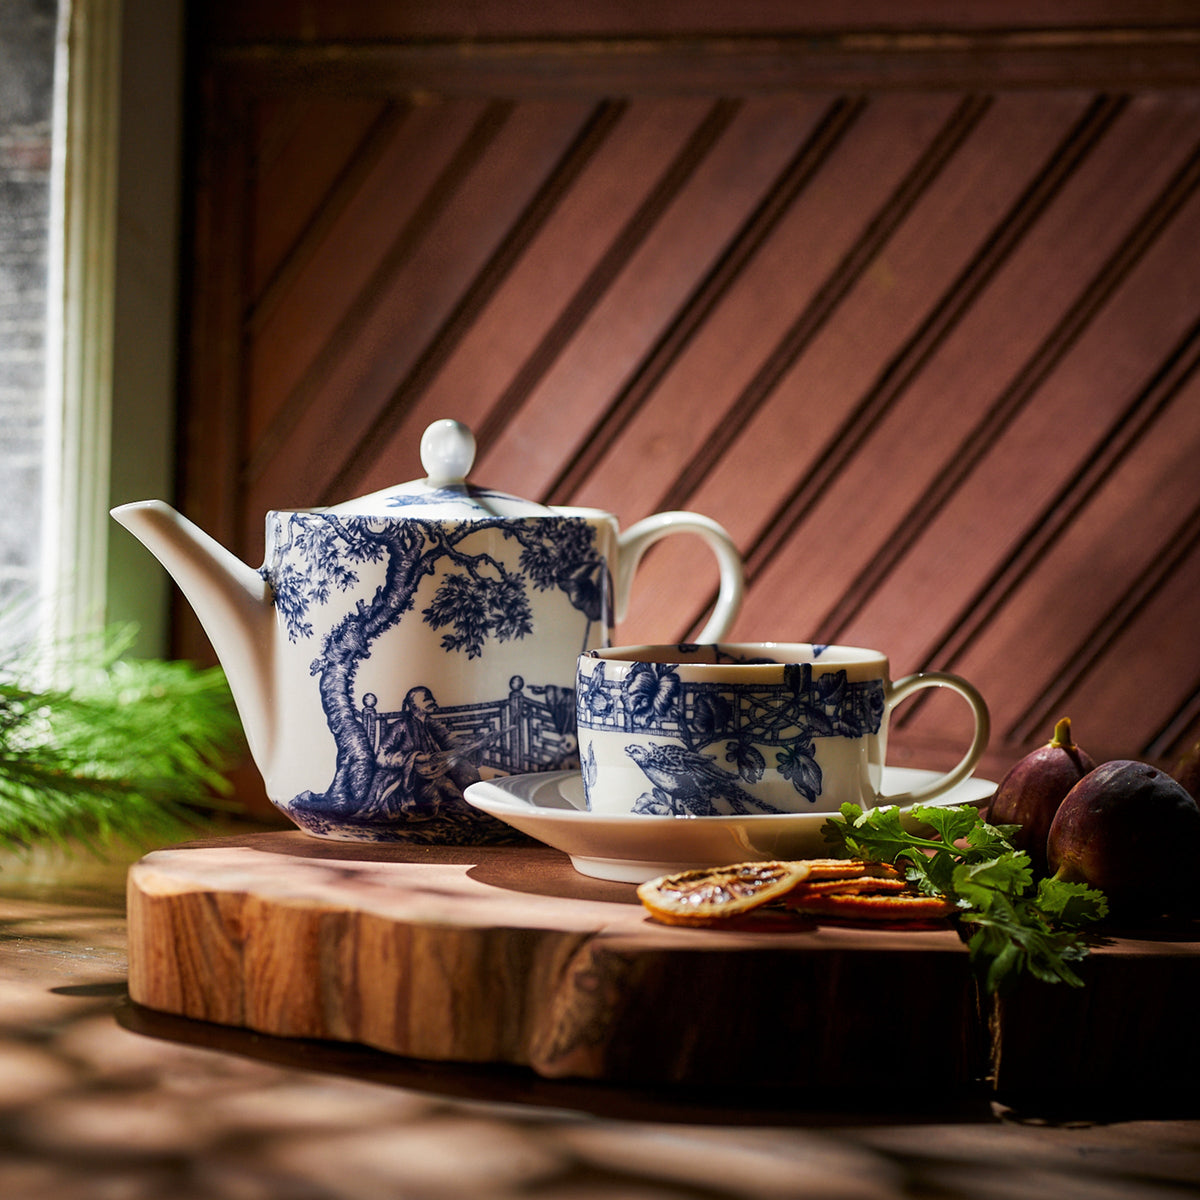 A blue and white Chinoiserie Toile teapot from Caskata Artisanal Home sits on a wooden cutting board.